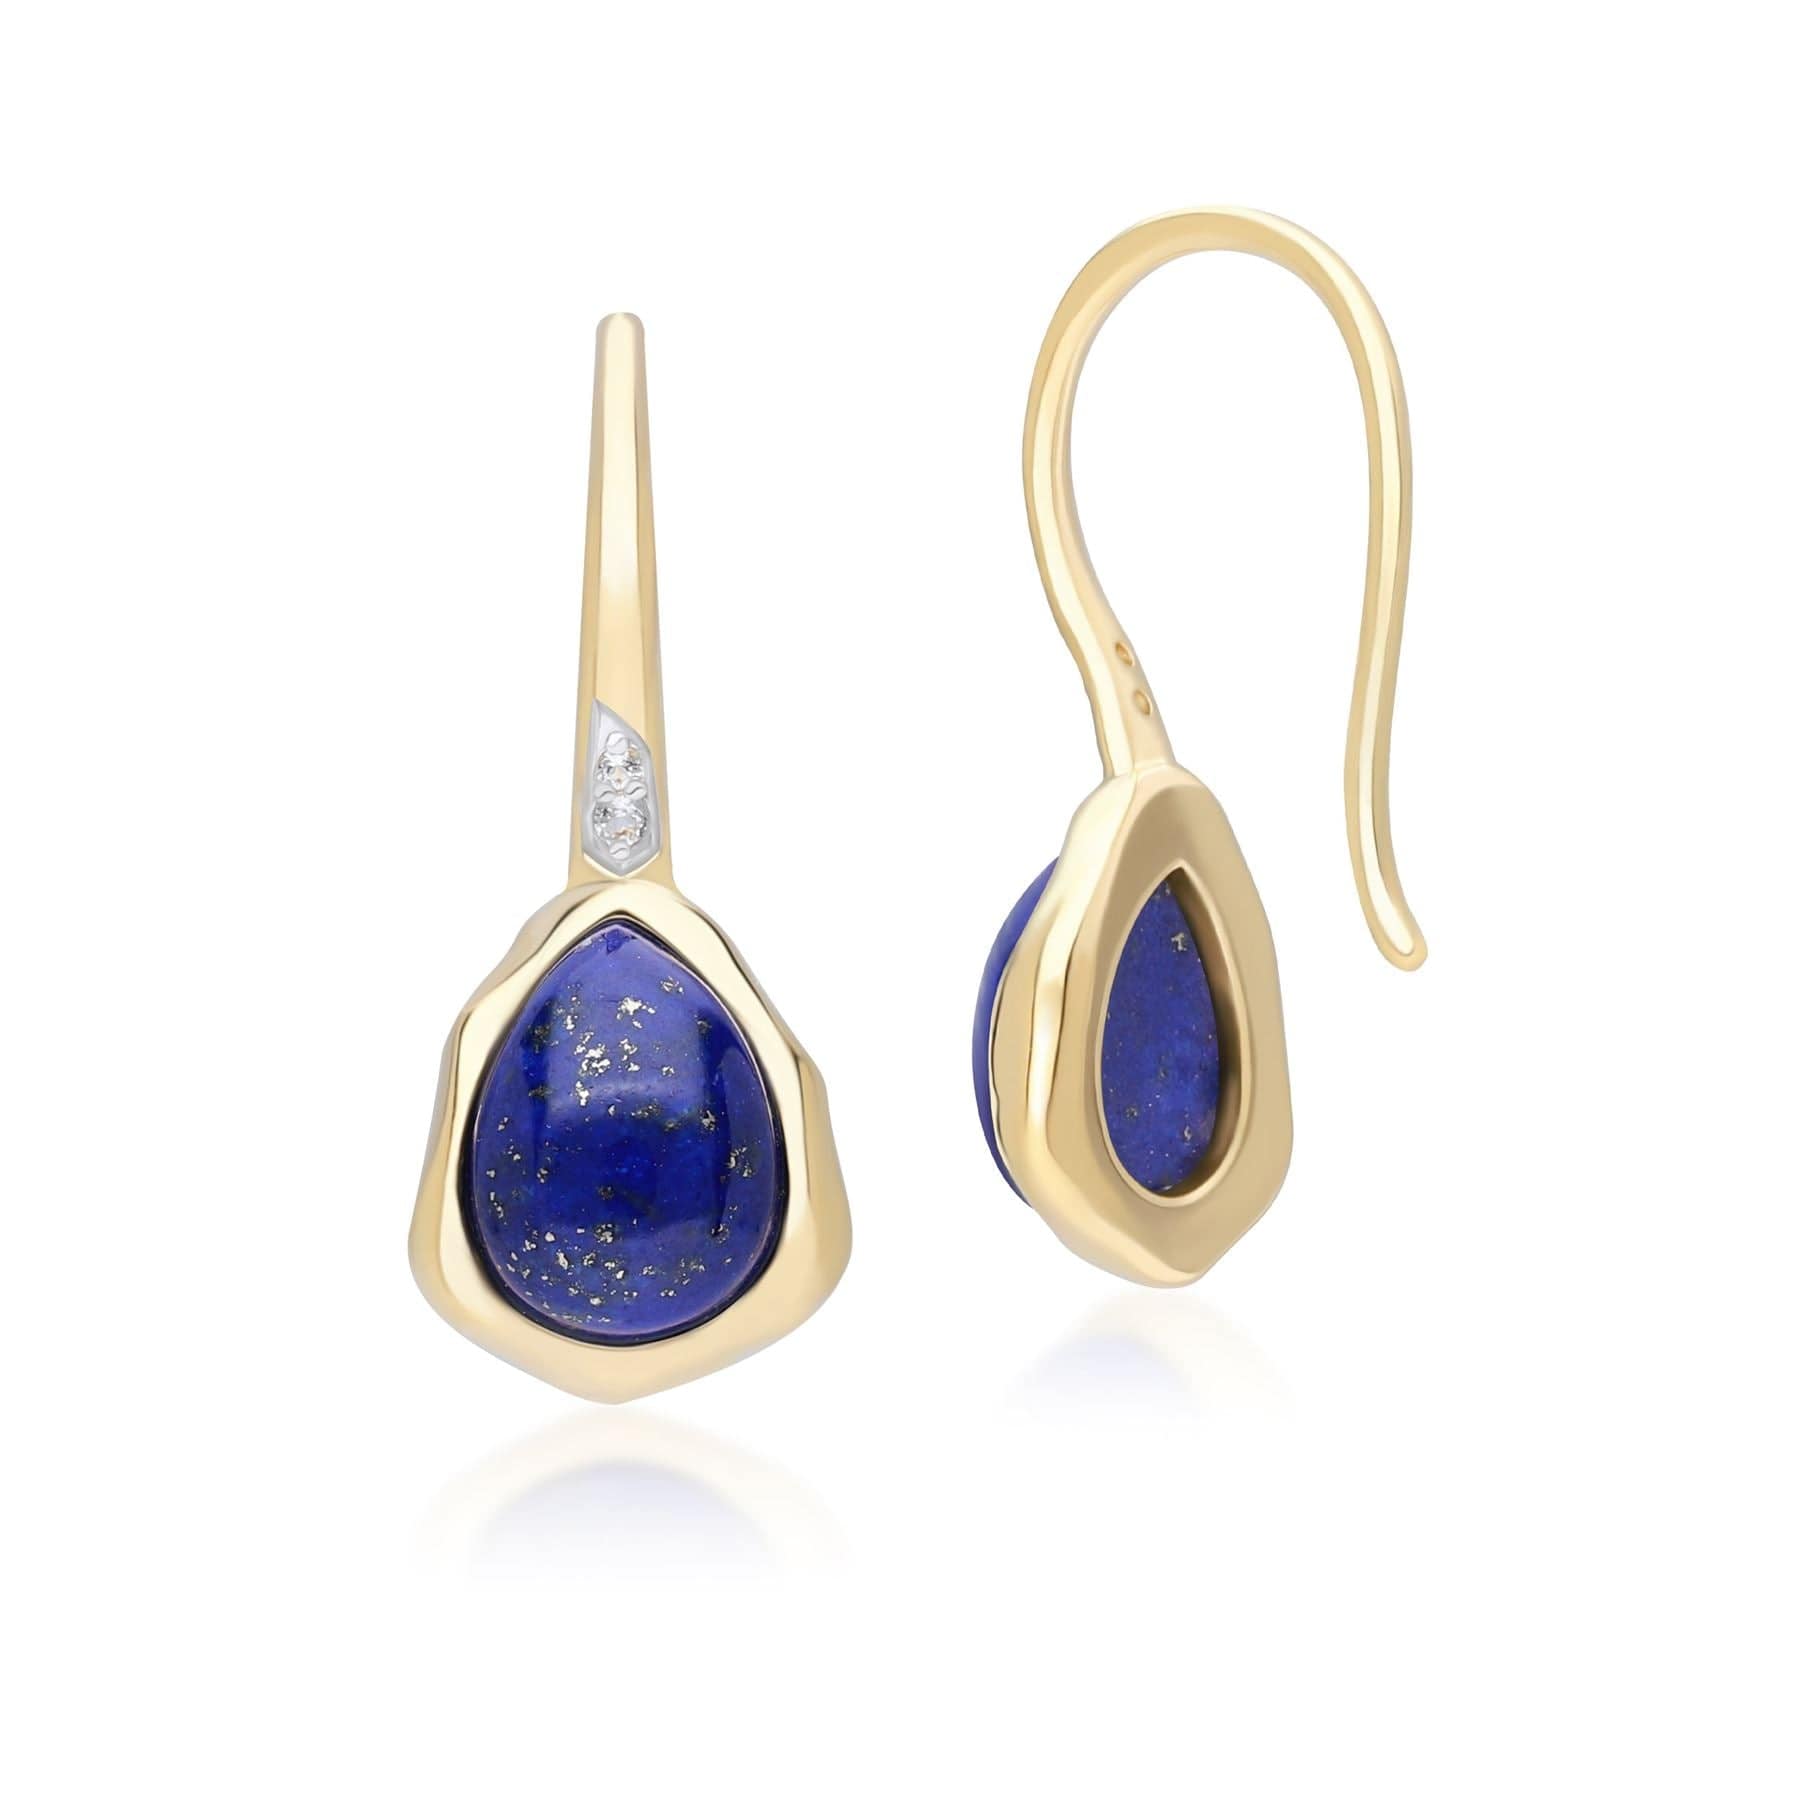 253E418702925 Irregular Lapis Lazuli & Topaz  Drop Earrings In 18ct Gold Plated SterlIng Silver Side